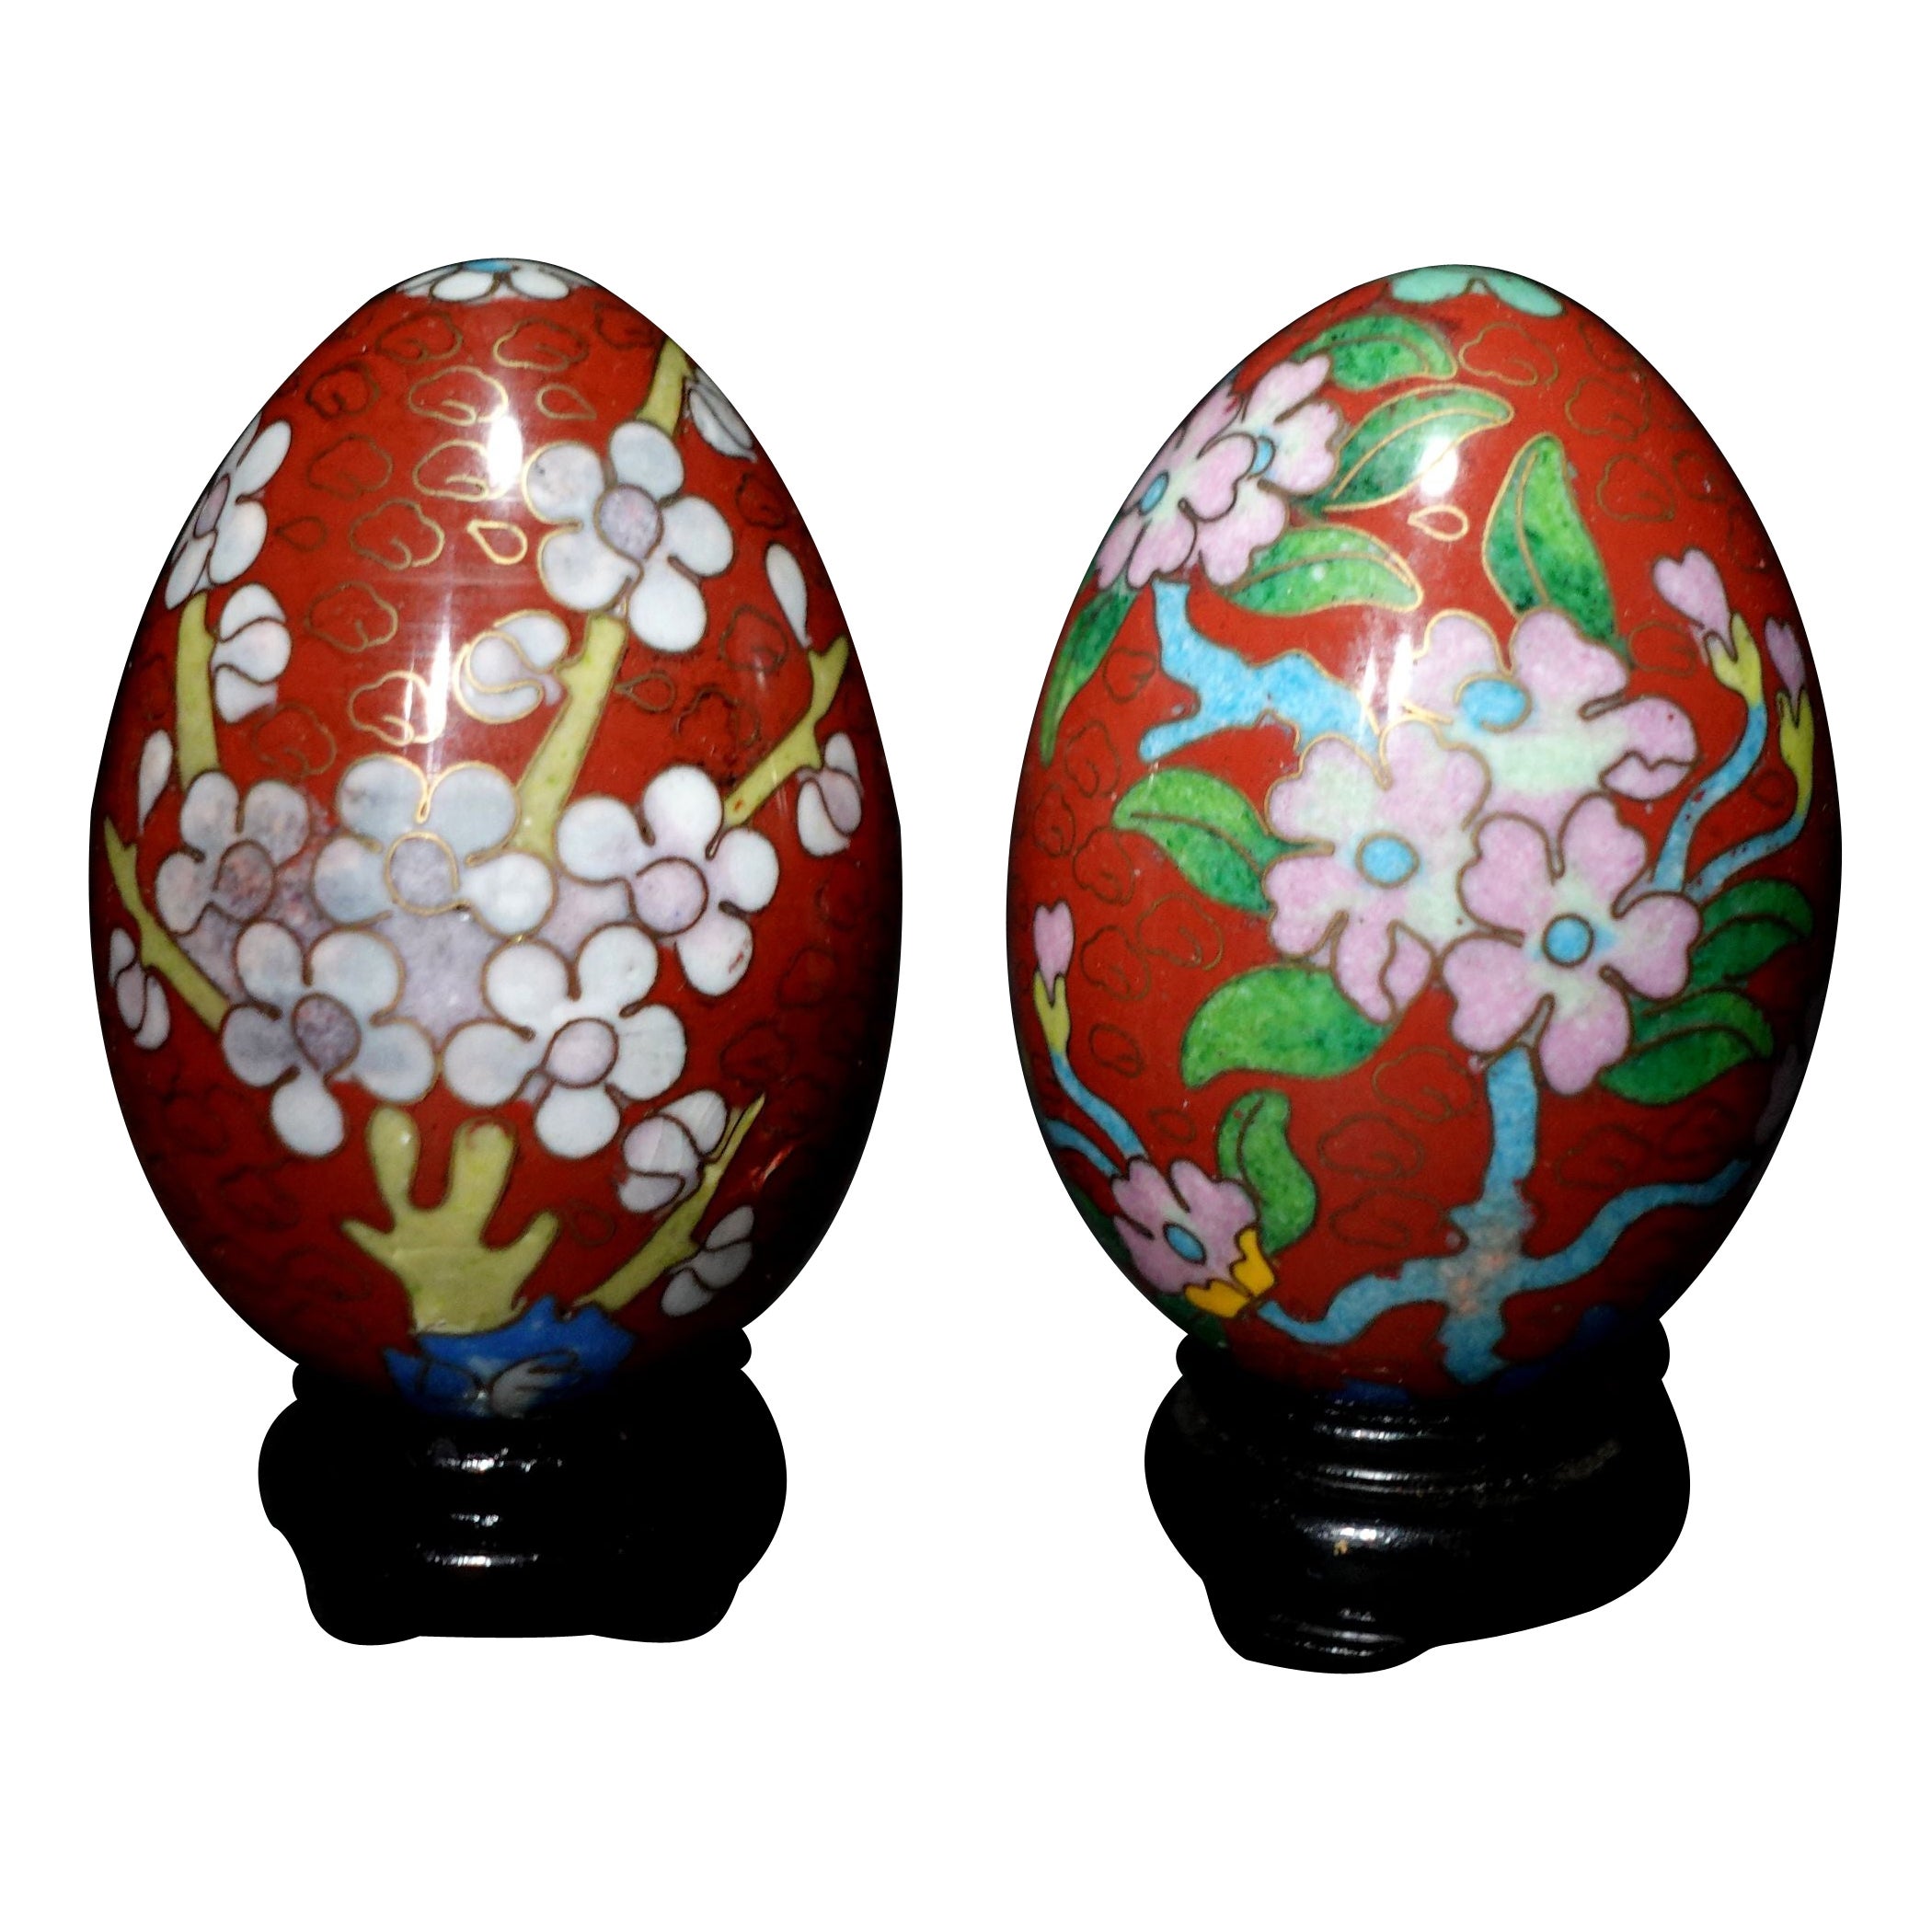 Two Chinese Cloisonné Enamel Eggs "Flowers" with Wood Stands #11